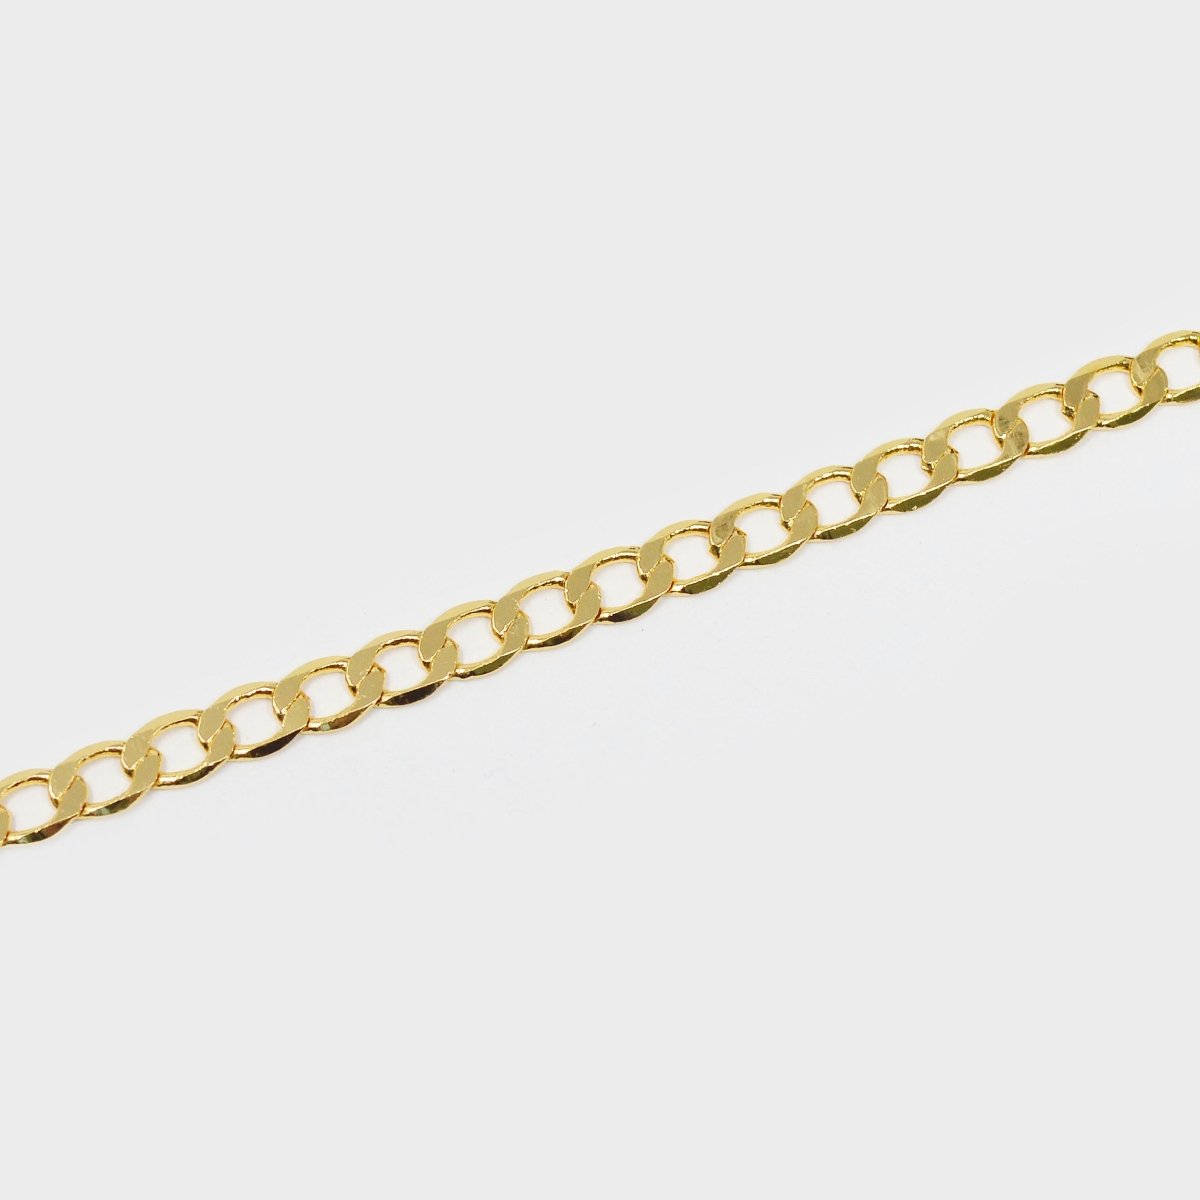 24K Flat Shiny Gold Filled 4.6X6.2mm Cuban CURB Chain by Yard, Unfinished Gold Chain for Bracelet Necklace Anklet Jewelry Making Supply | ROLL-430 Clearance Pricing - DLUXCA